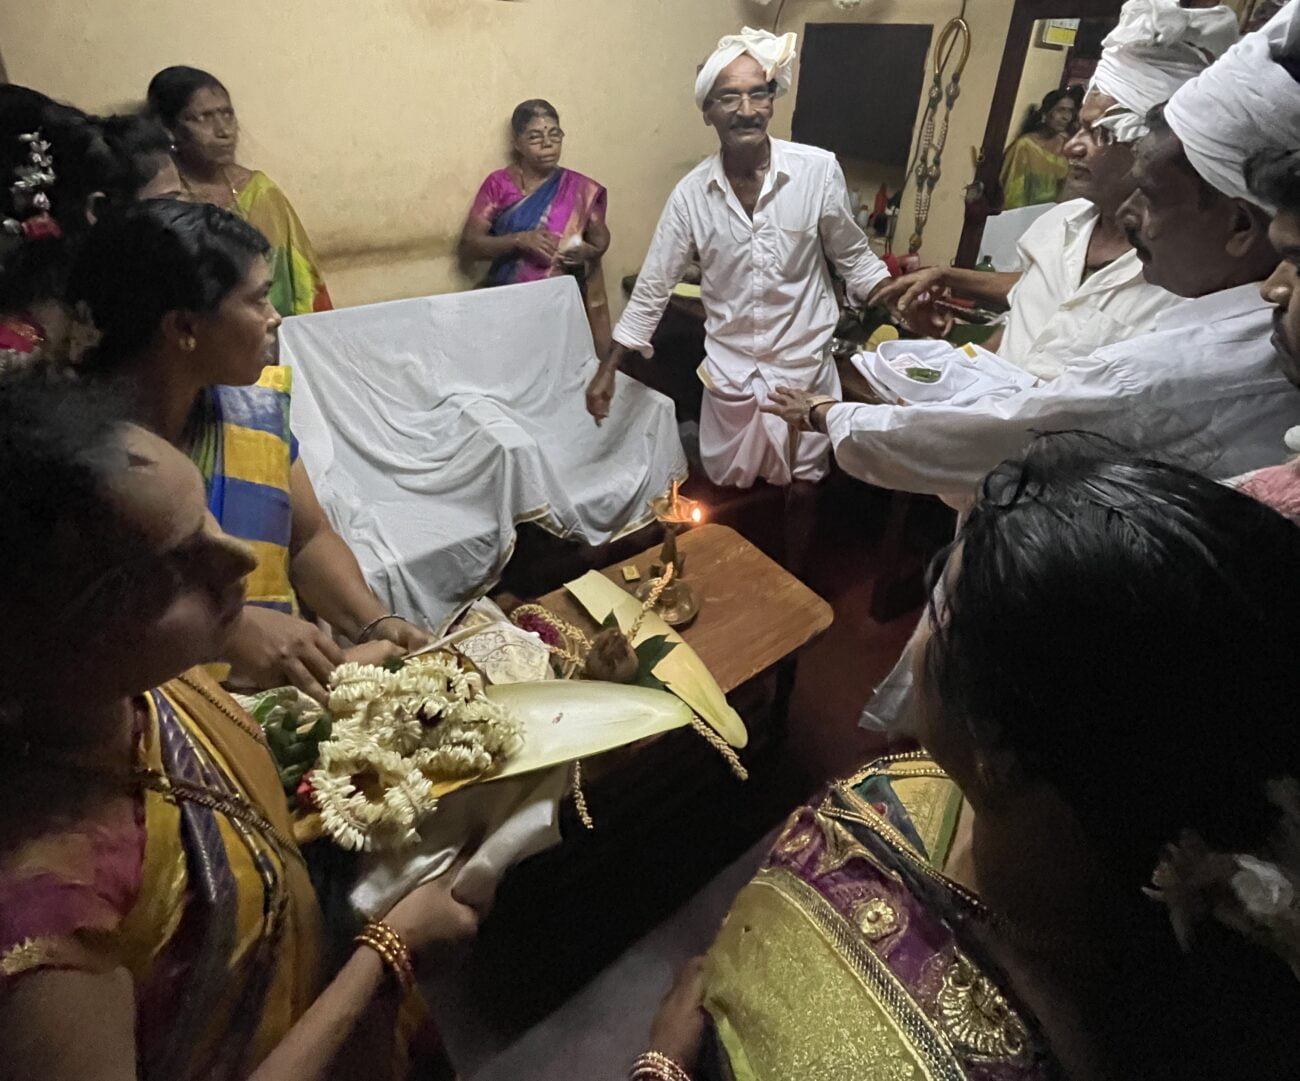 A tradition of marrying the dead In India